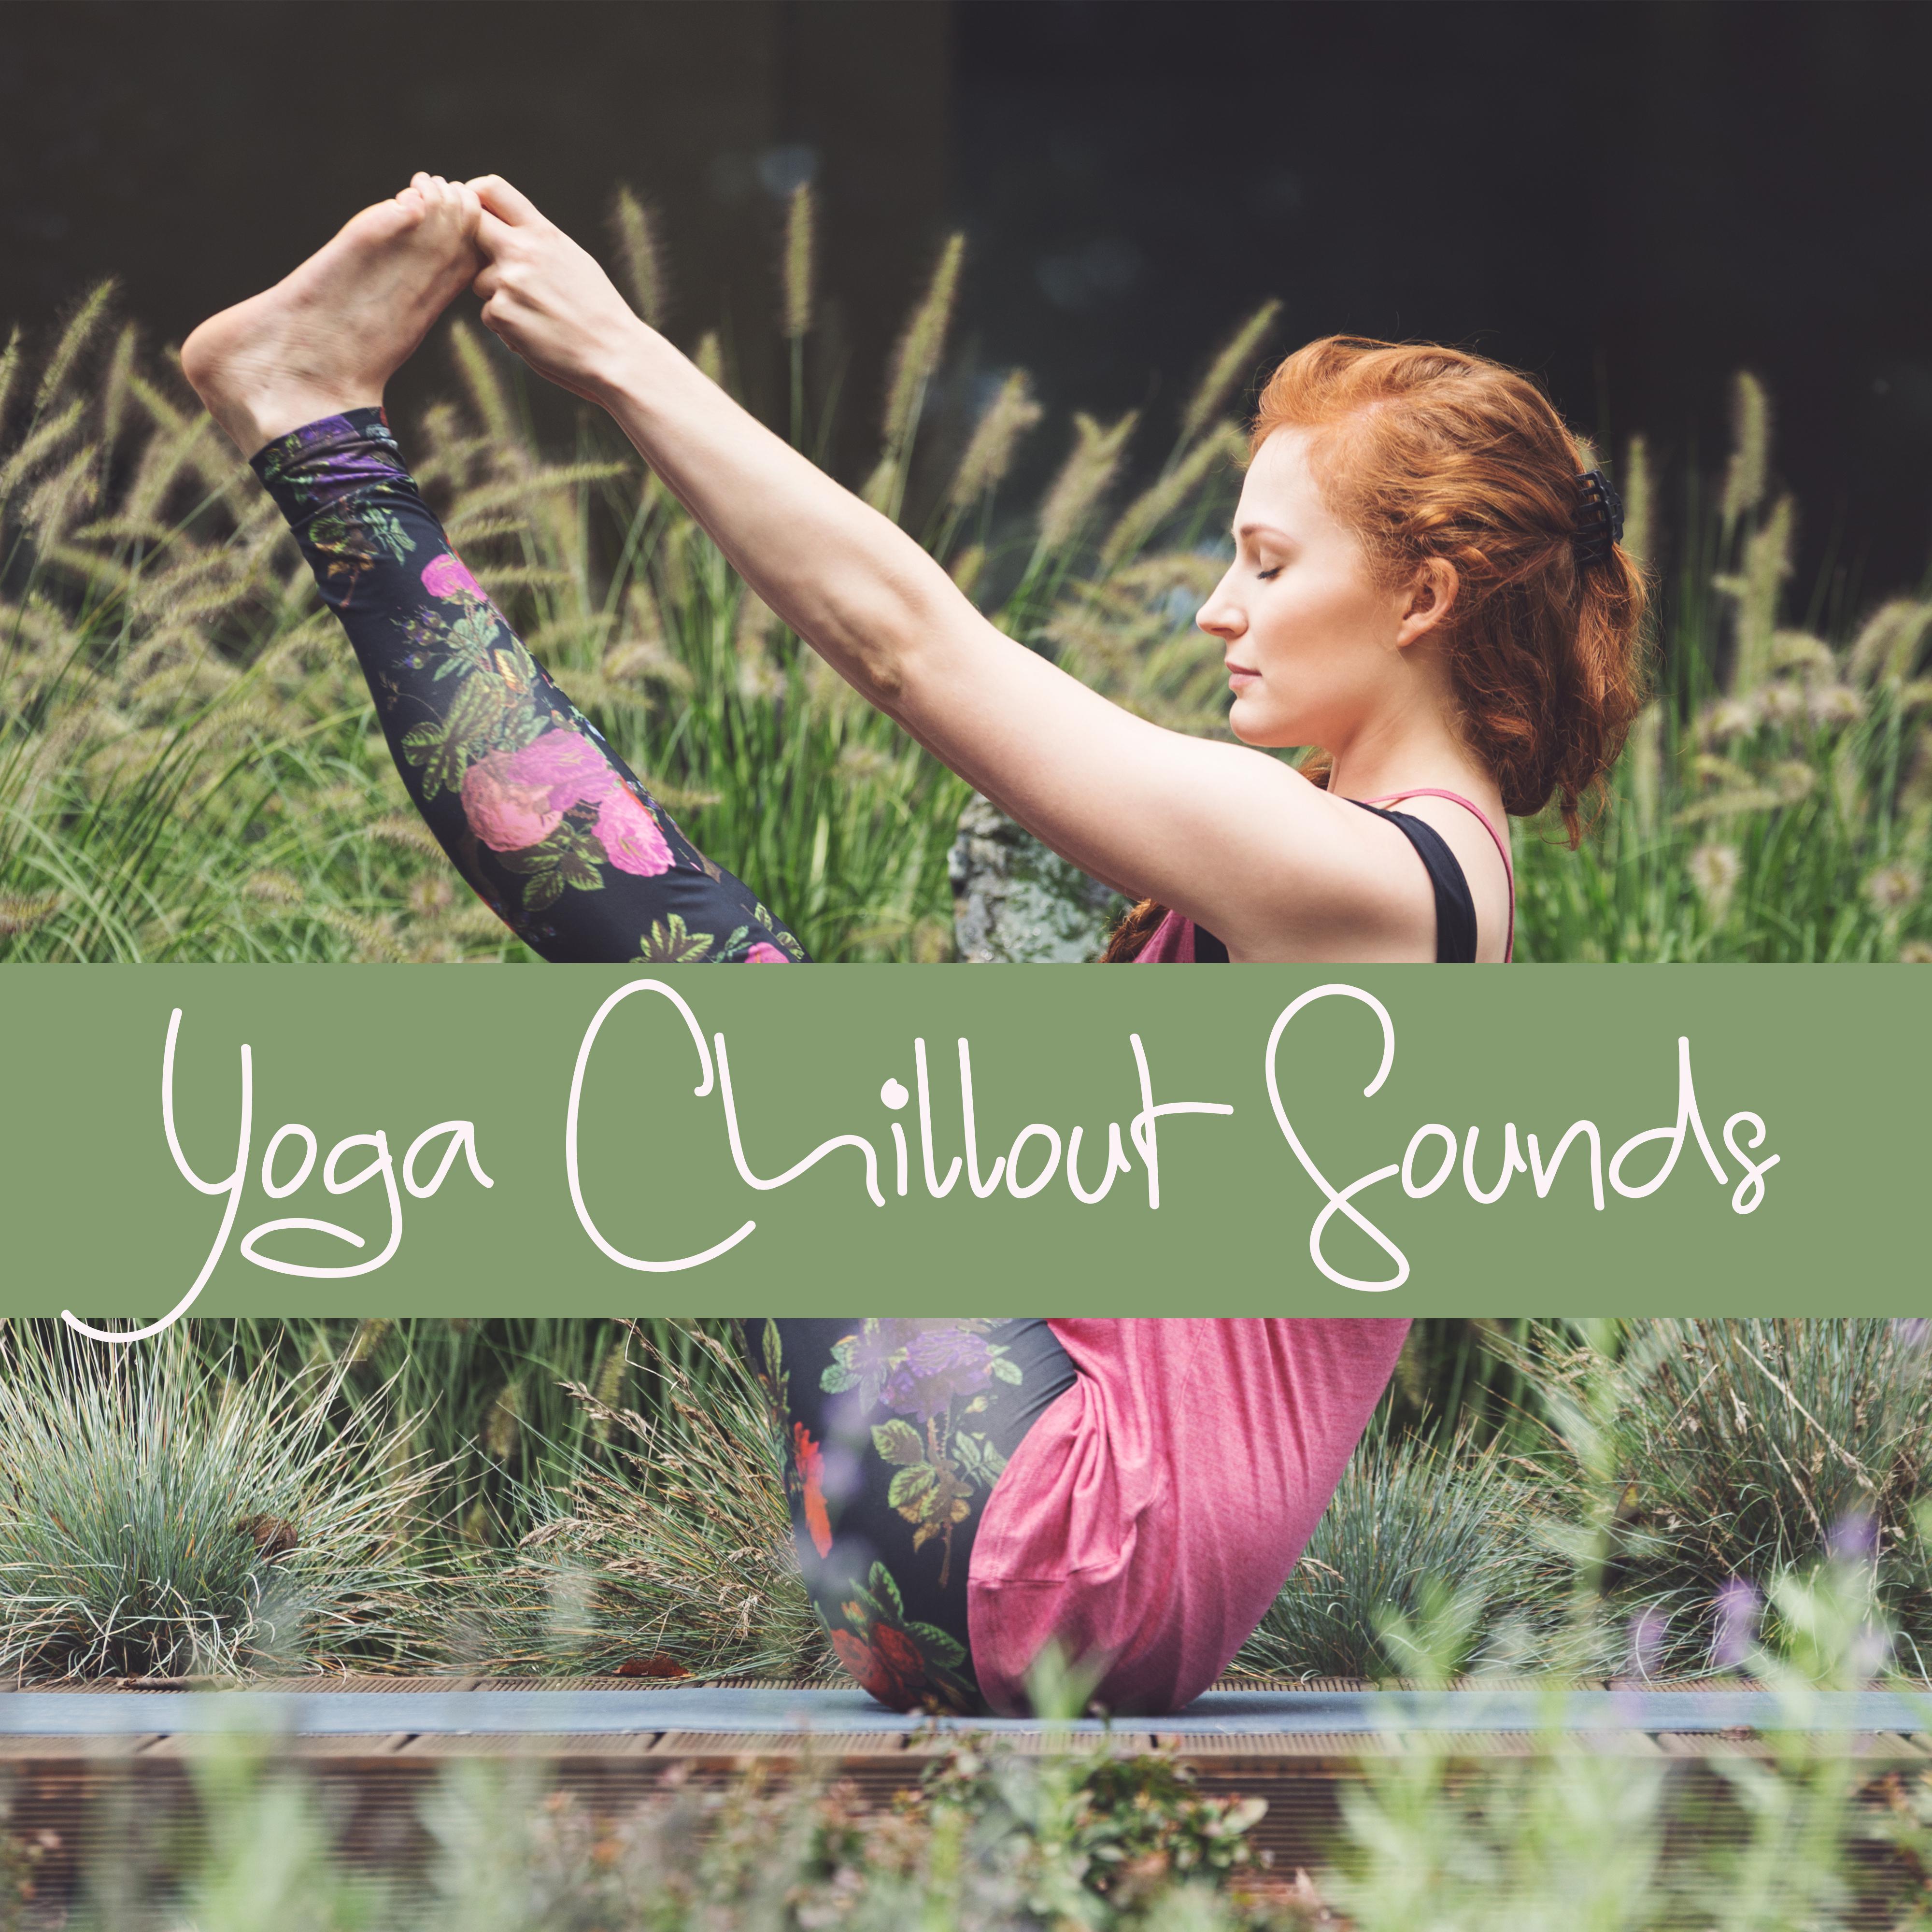 Yoga Chillout Sounds